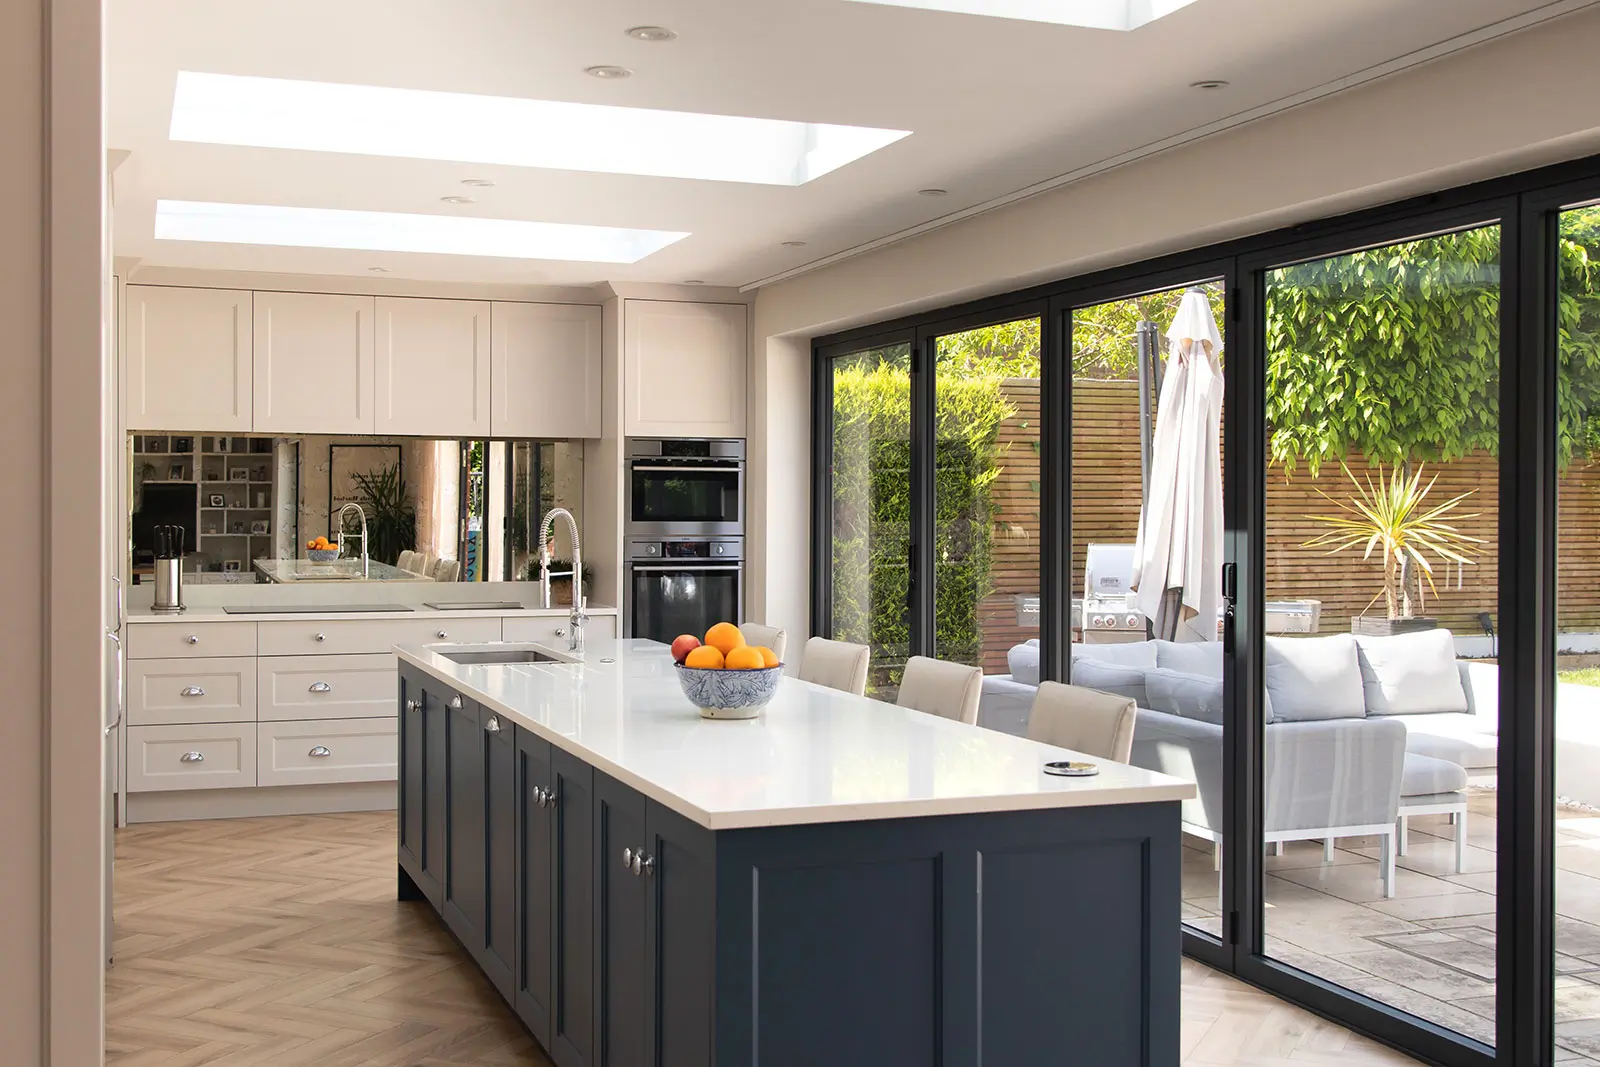 Kitchen island with large window to the garden